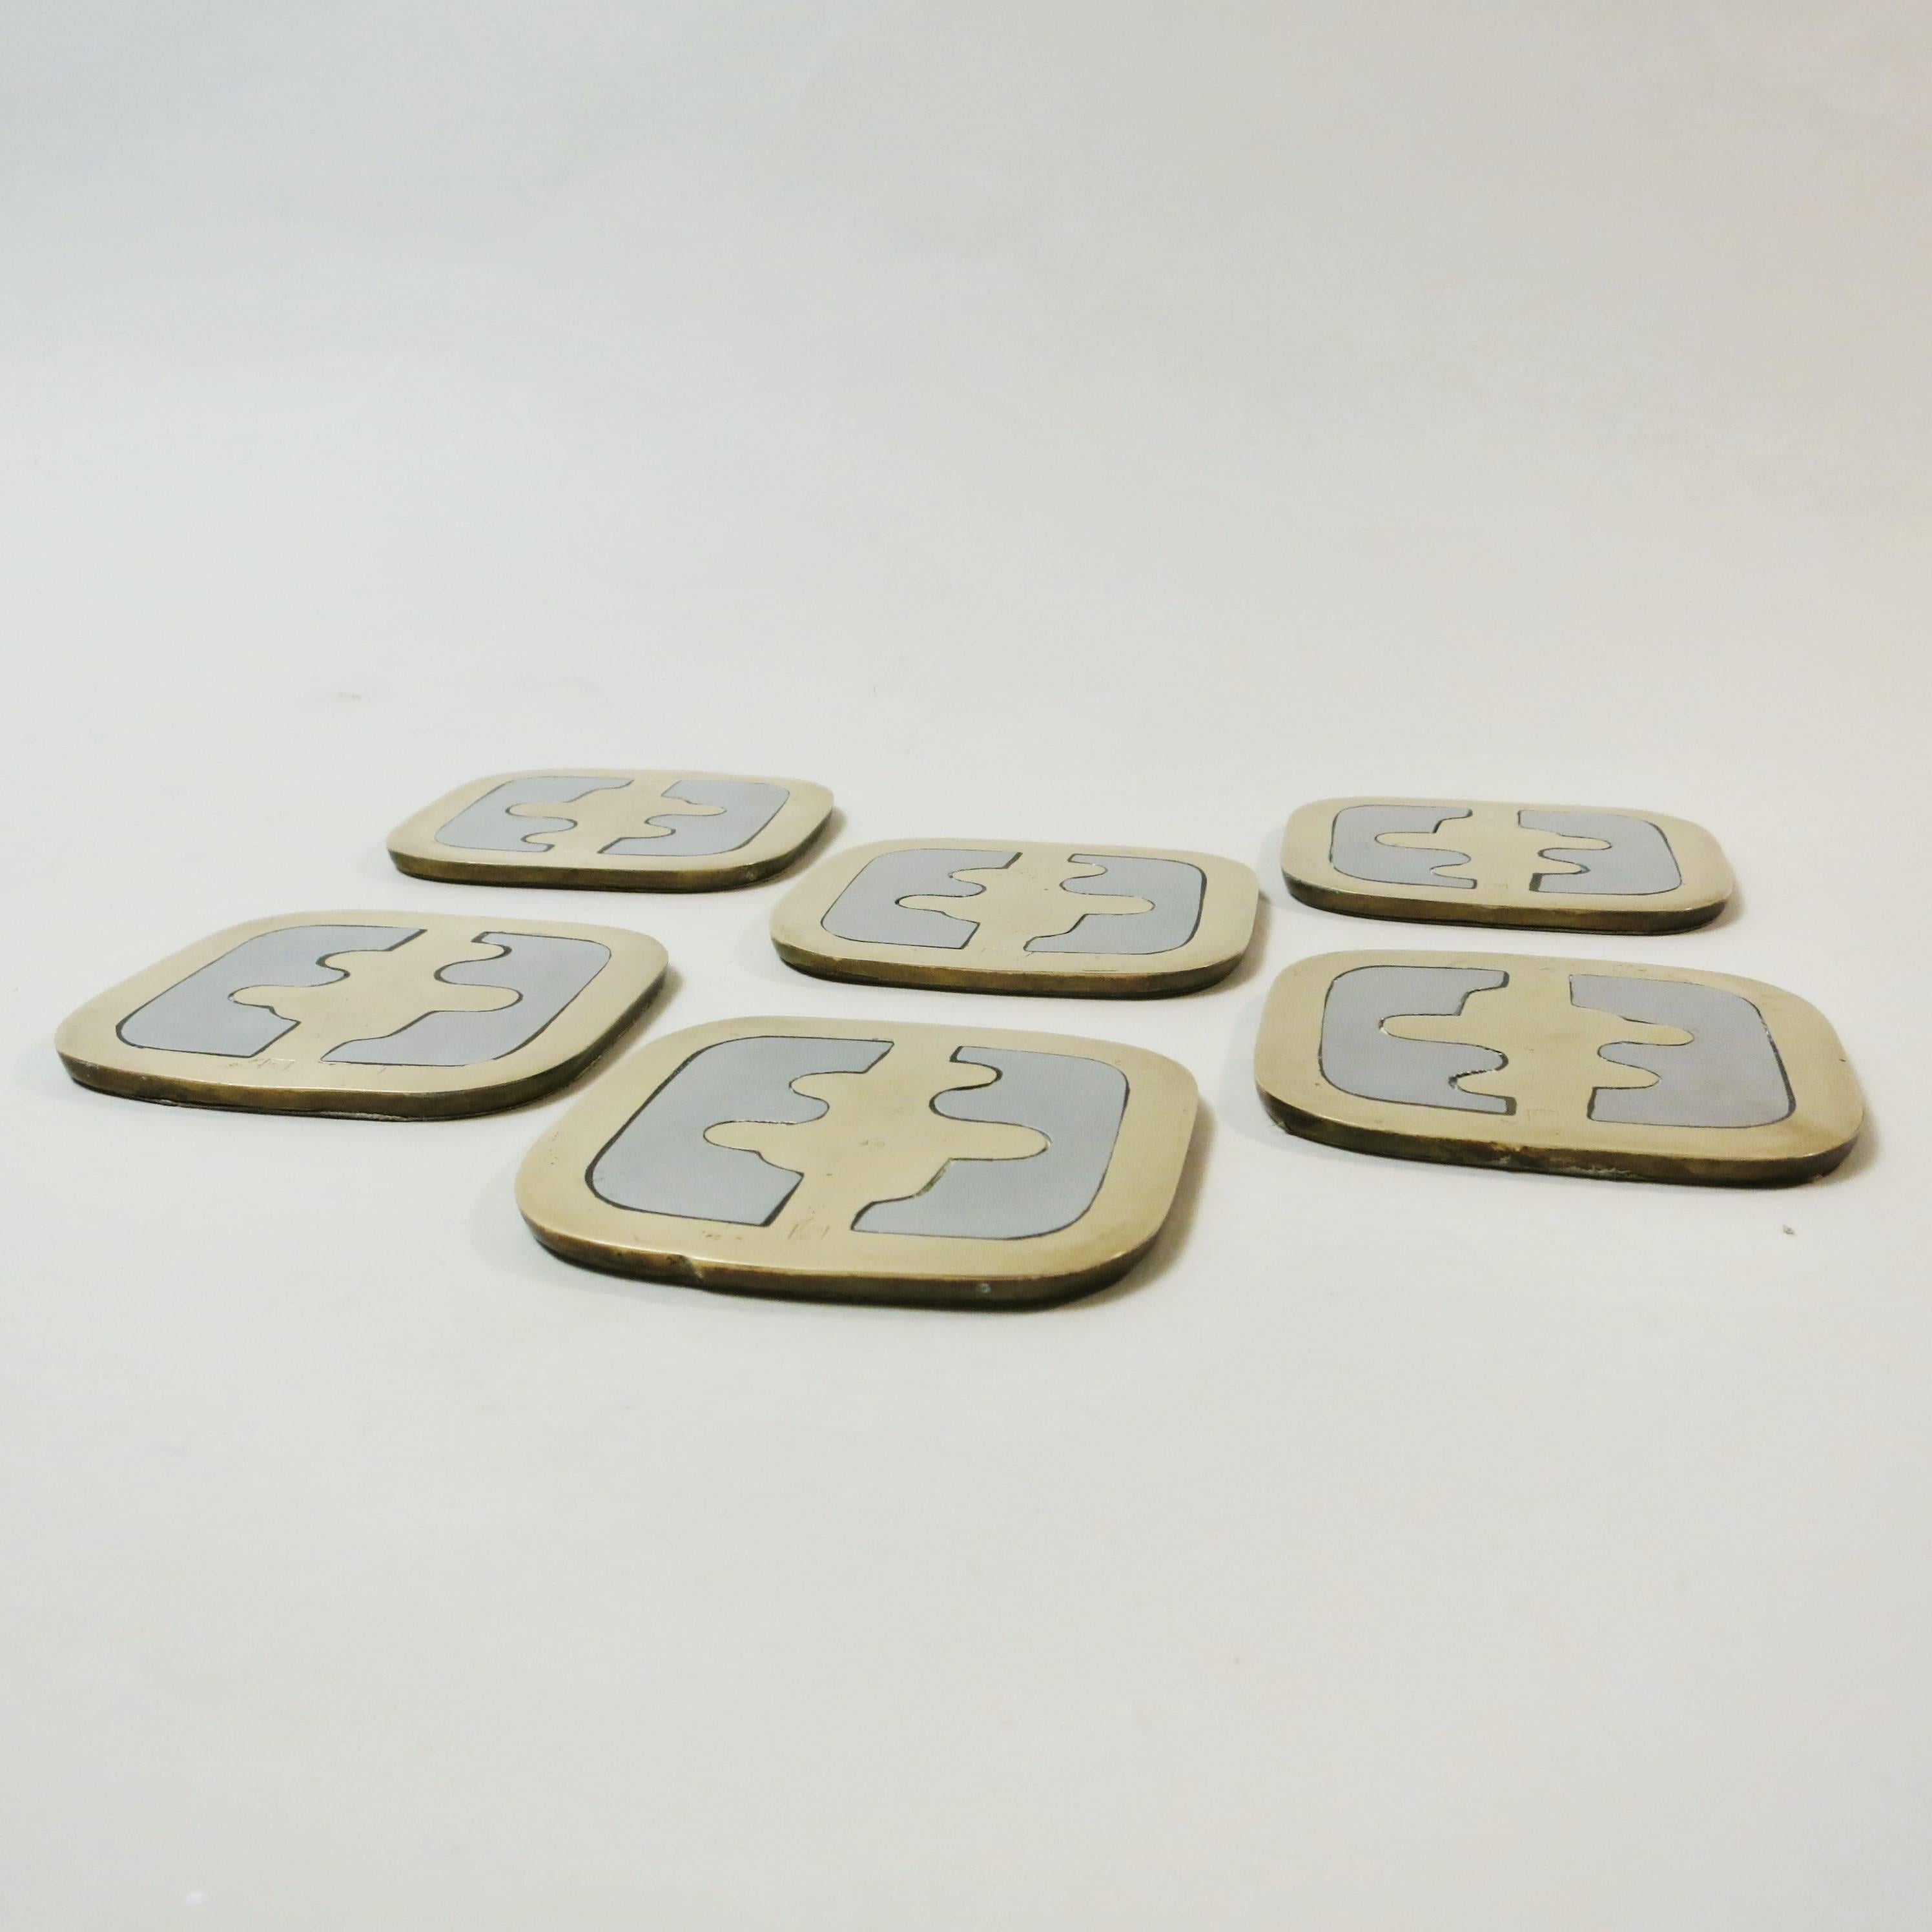 Set of six Brutalist coaster in brass and aluminium cast made by David Marshall in Sevilla Spain, circa 1970. All coaster are handcrafted and are a little bit different from each other. Labelled on the back on a leather cover.